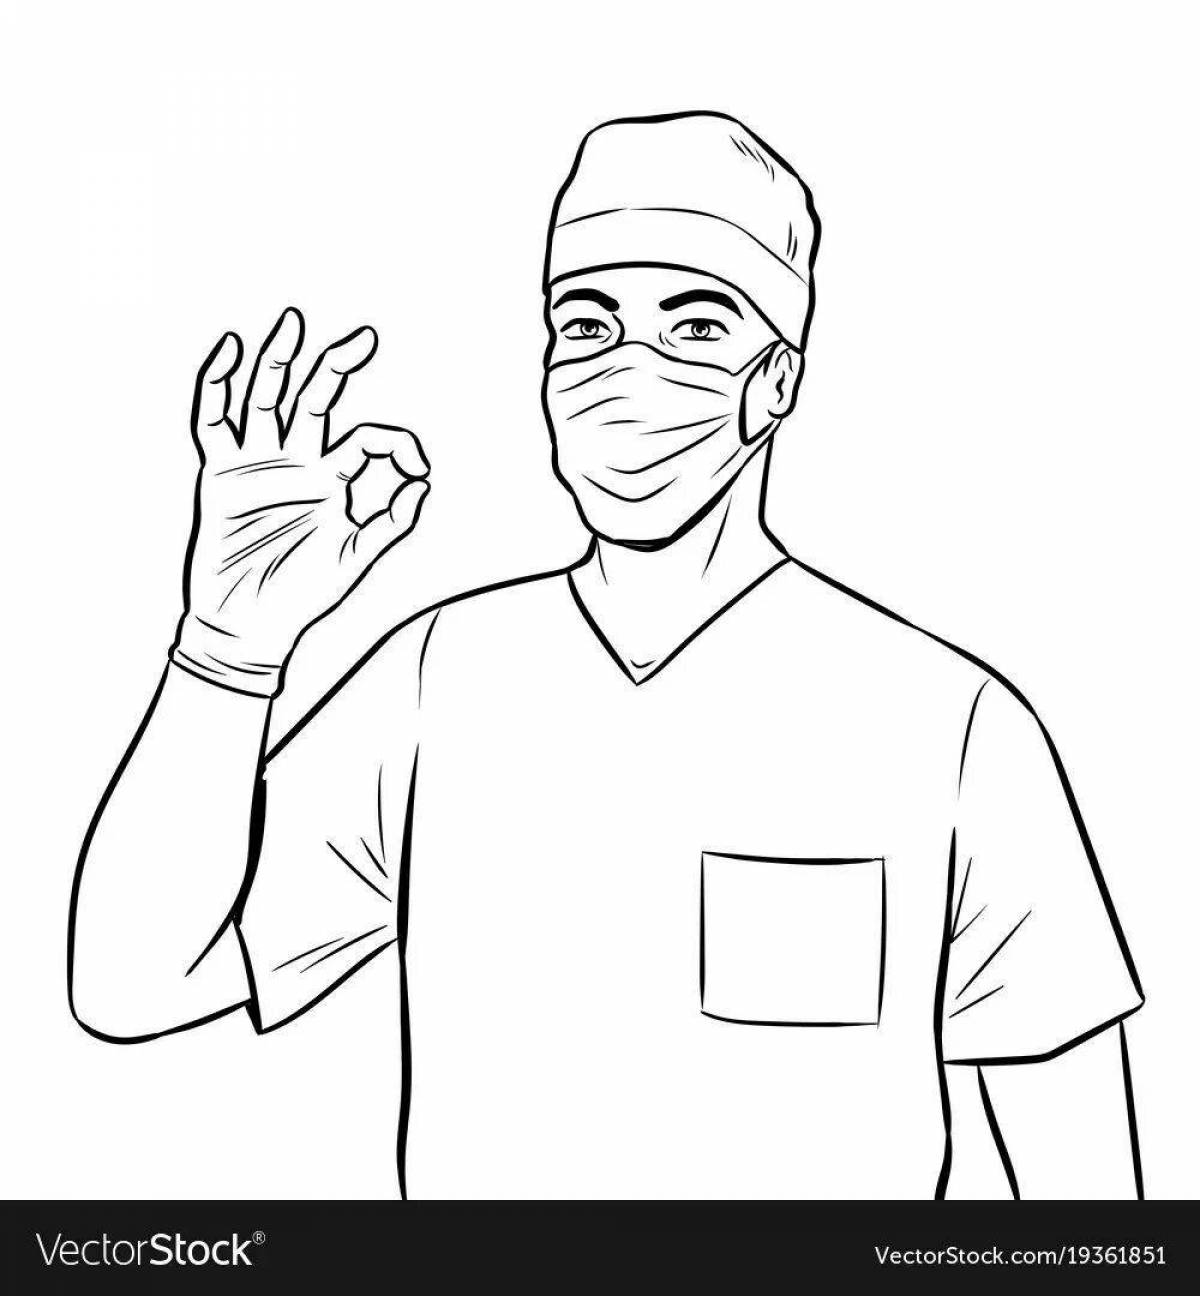 Amazing surgery coloring page